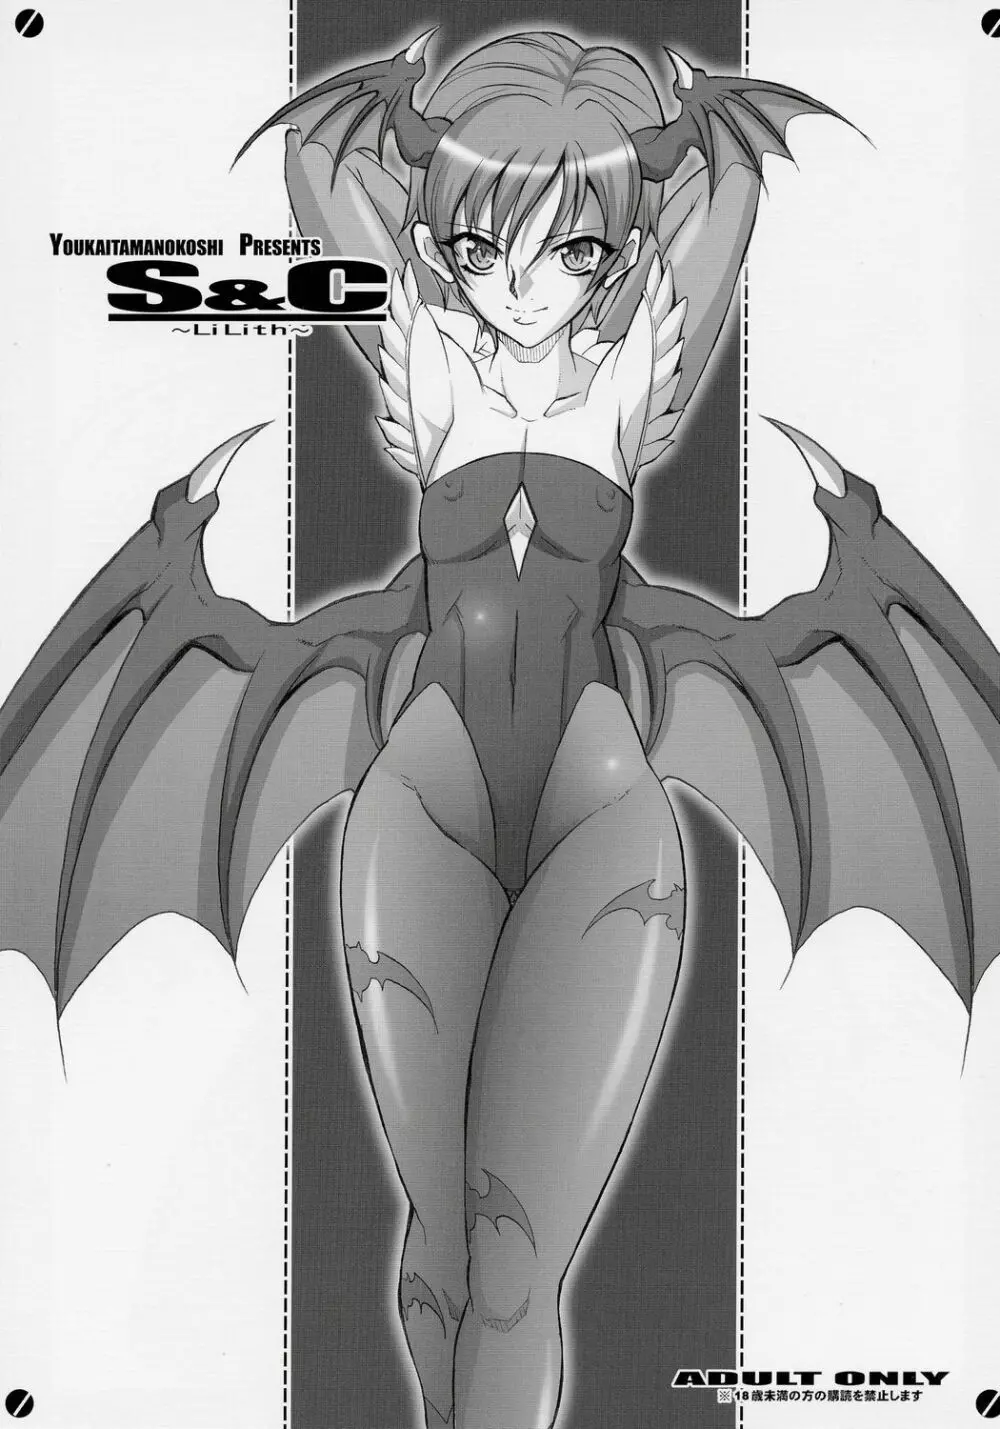 S&C -Lilith-